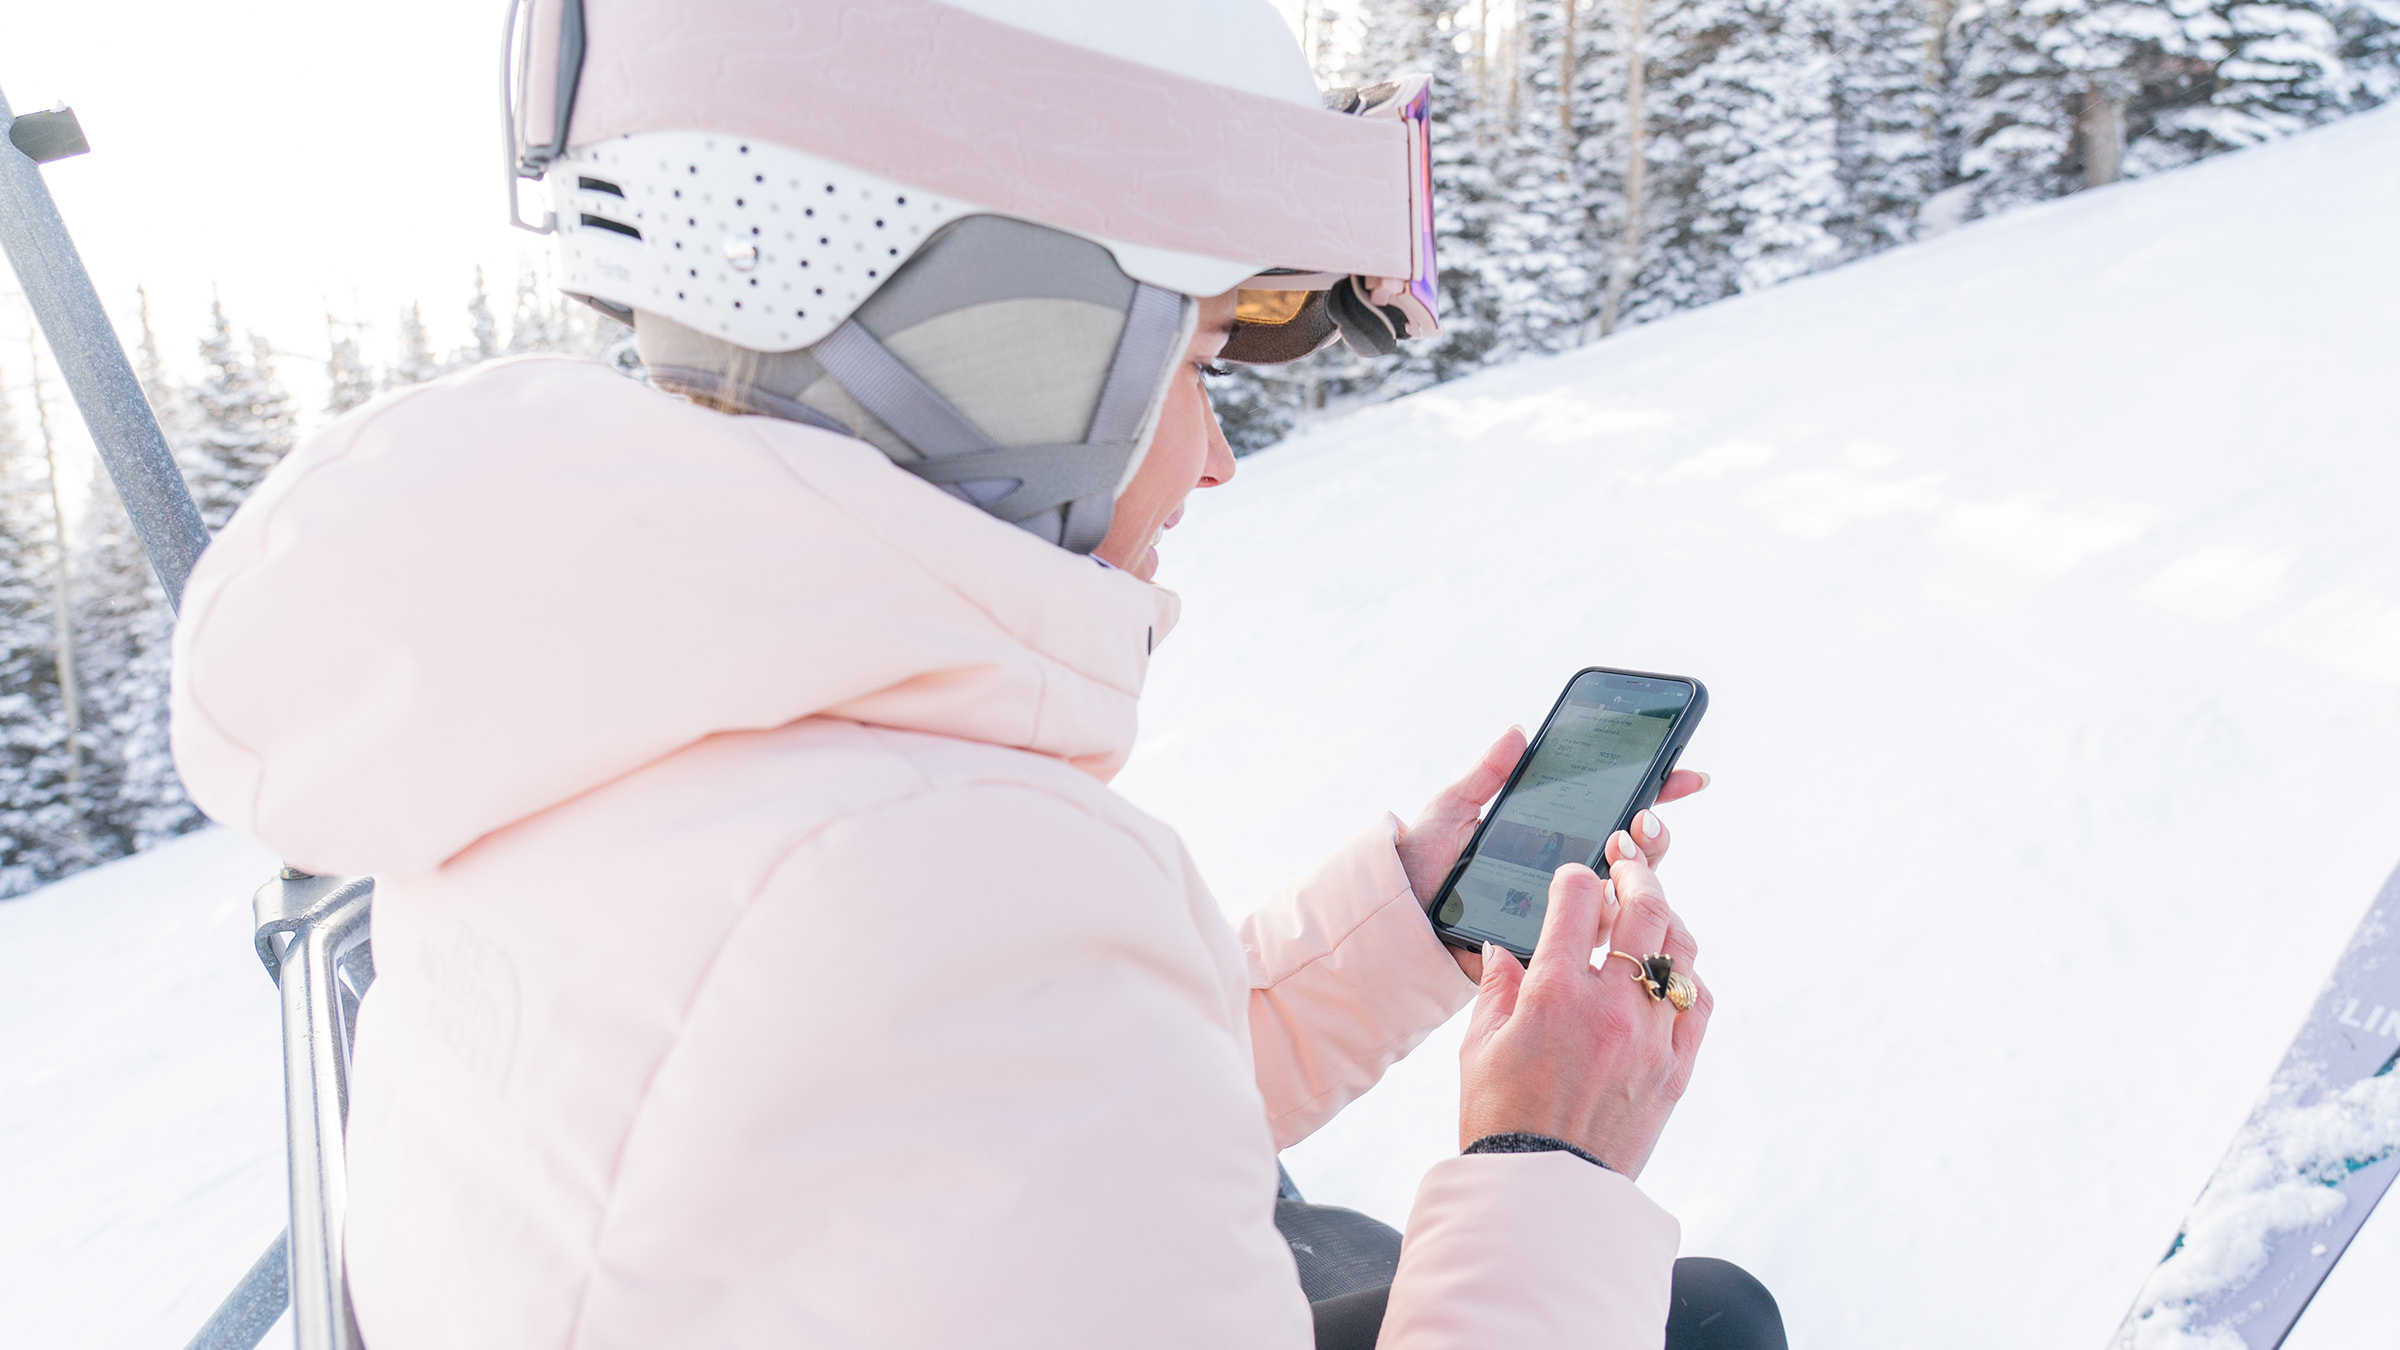 A skier using their phone to download the Deer Valley mobile app.